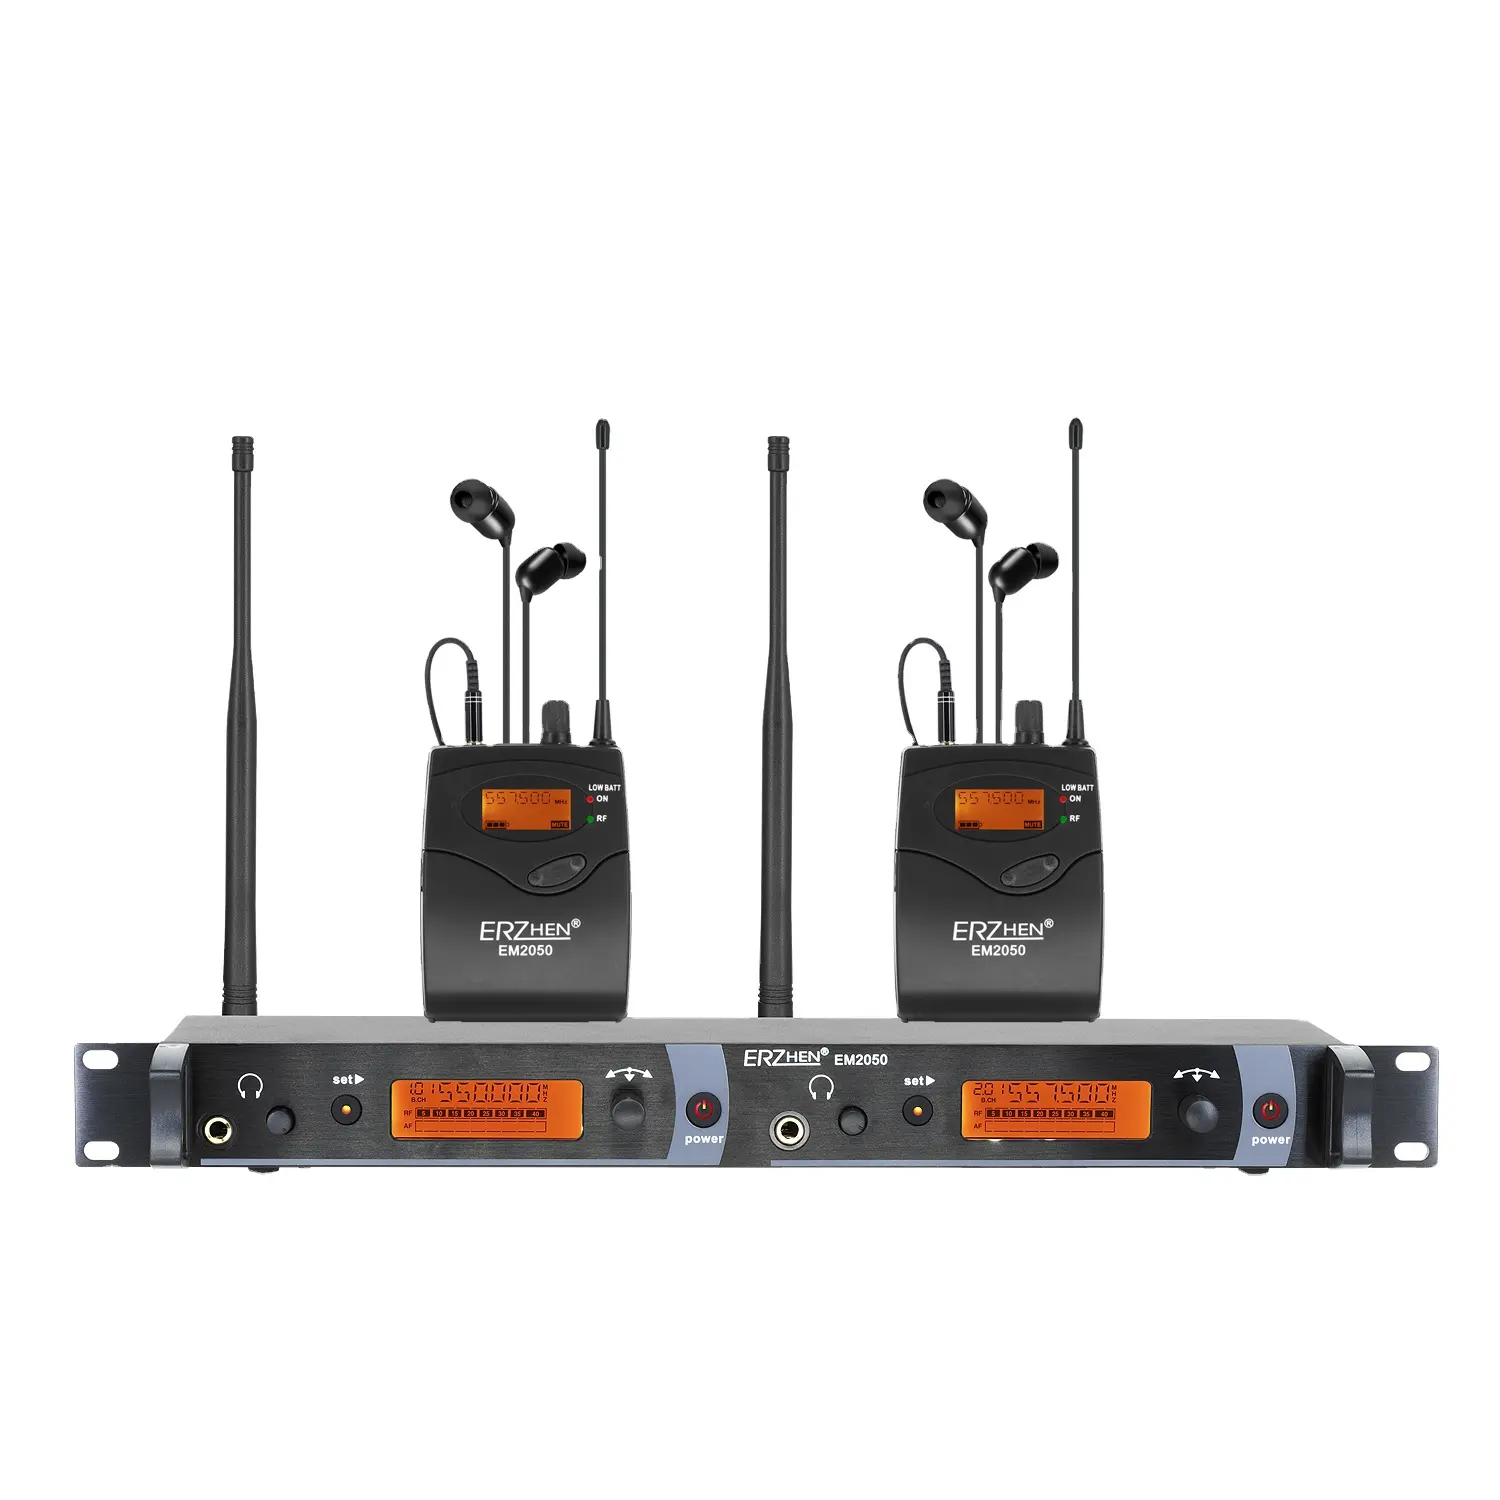 ERZHEN EM2050 In-Ear Monitor Wireless System Multi Transmitter Wireless In Ear Monitor Professional For Stage Performance